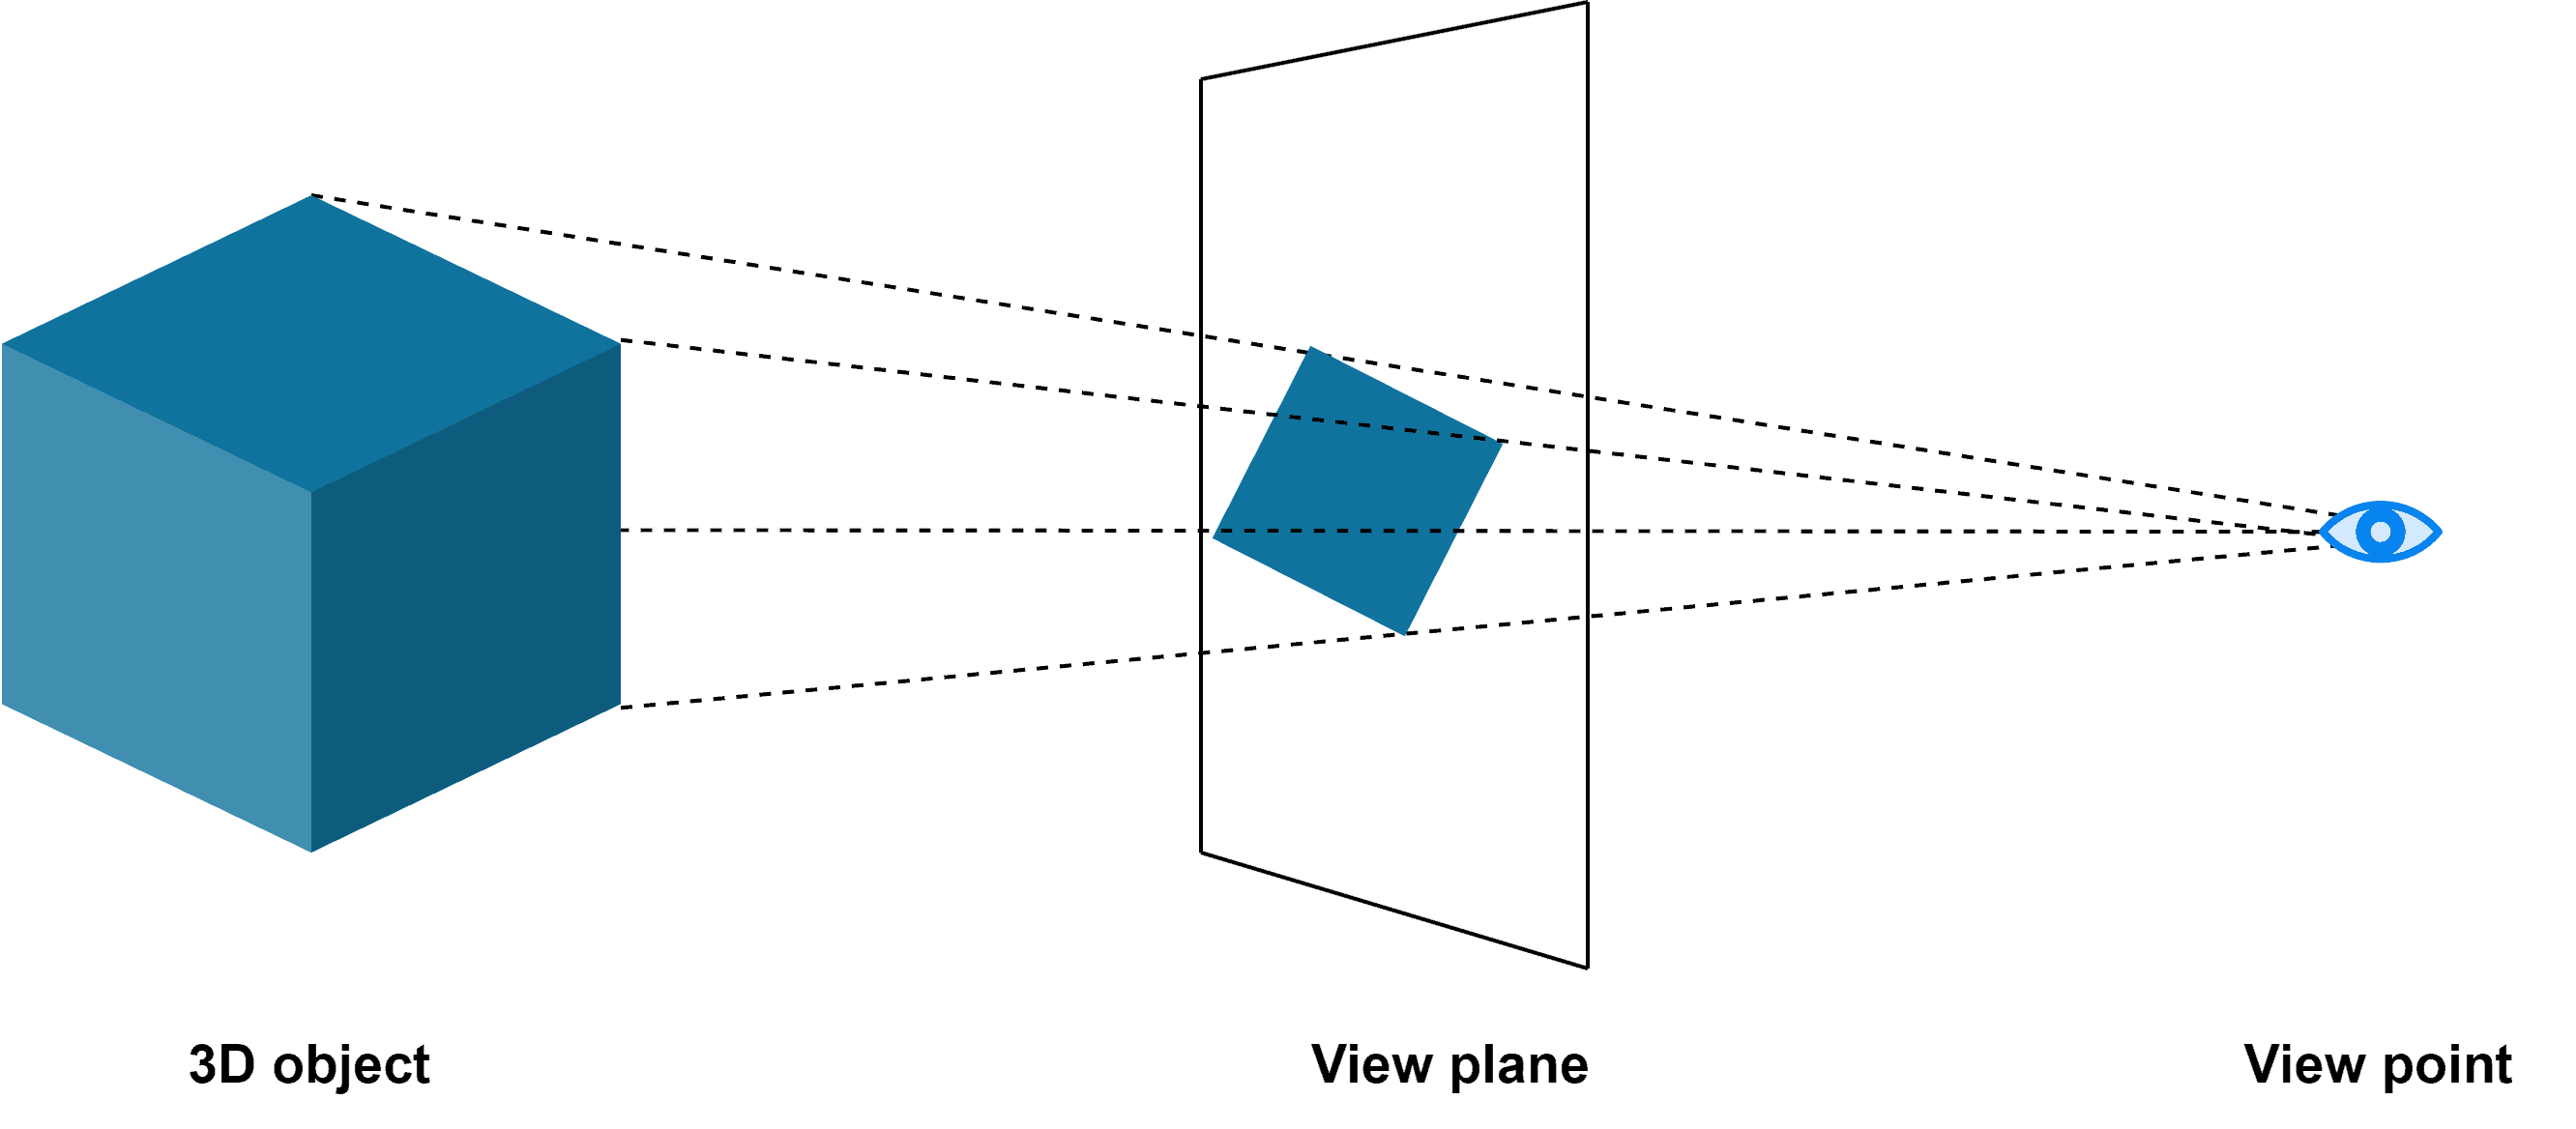 This is an example of perspective projection